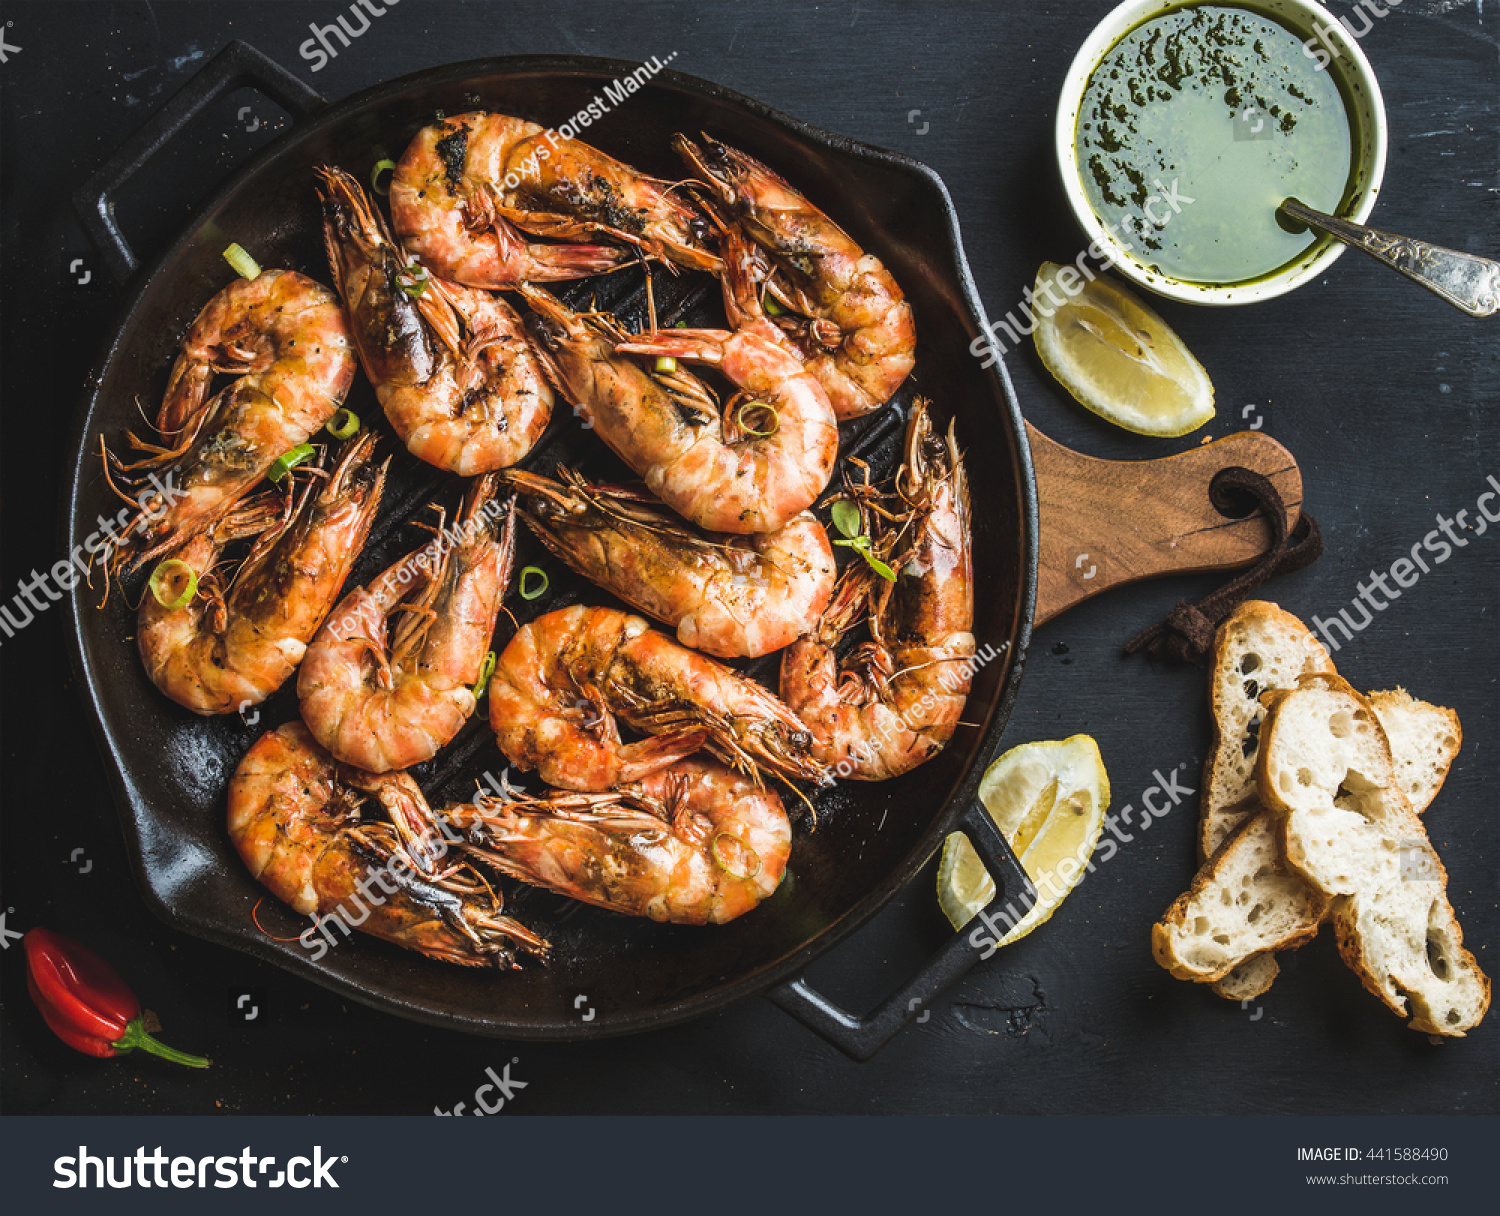 Roasted tiger prawns in iron grilling pan with fresh leek, lemon, bread and pesto sauce over black background, top view #441588490